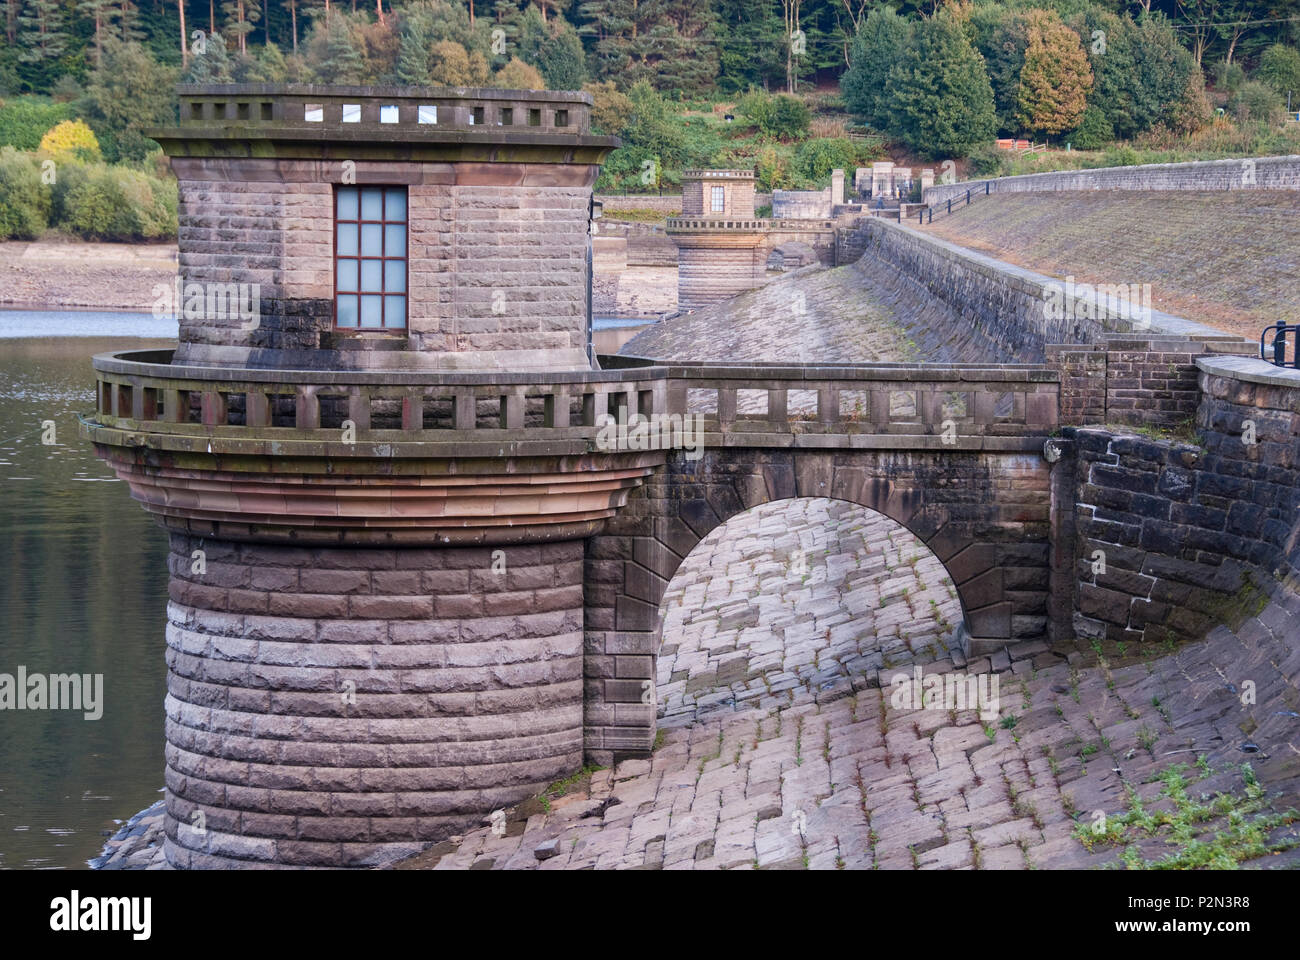 DERBYSHIRE UK - 06 Oct : Ladybower reservoir dam head wall path and draw off tower exposed by low water level on 06 Oct 2013 in the Peak District, UK Stock Photo